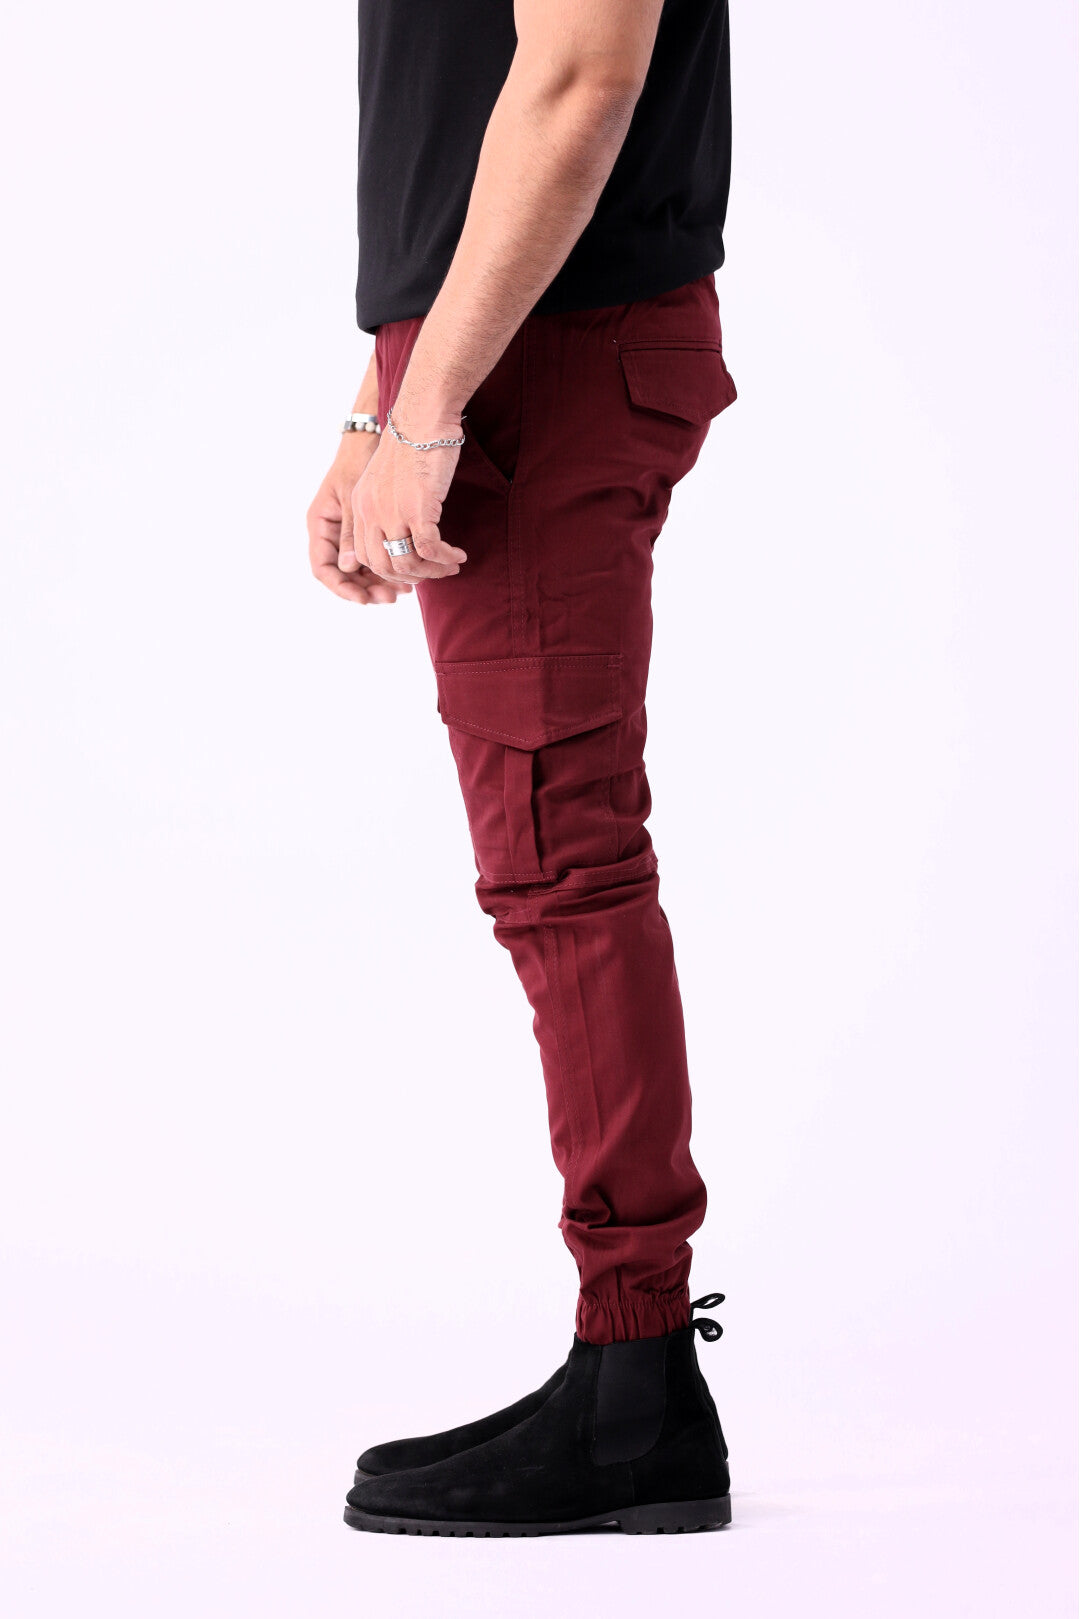 Cargo Six Pocket Trousers for Men, Maroon 6 Pocket Cargo Pant